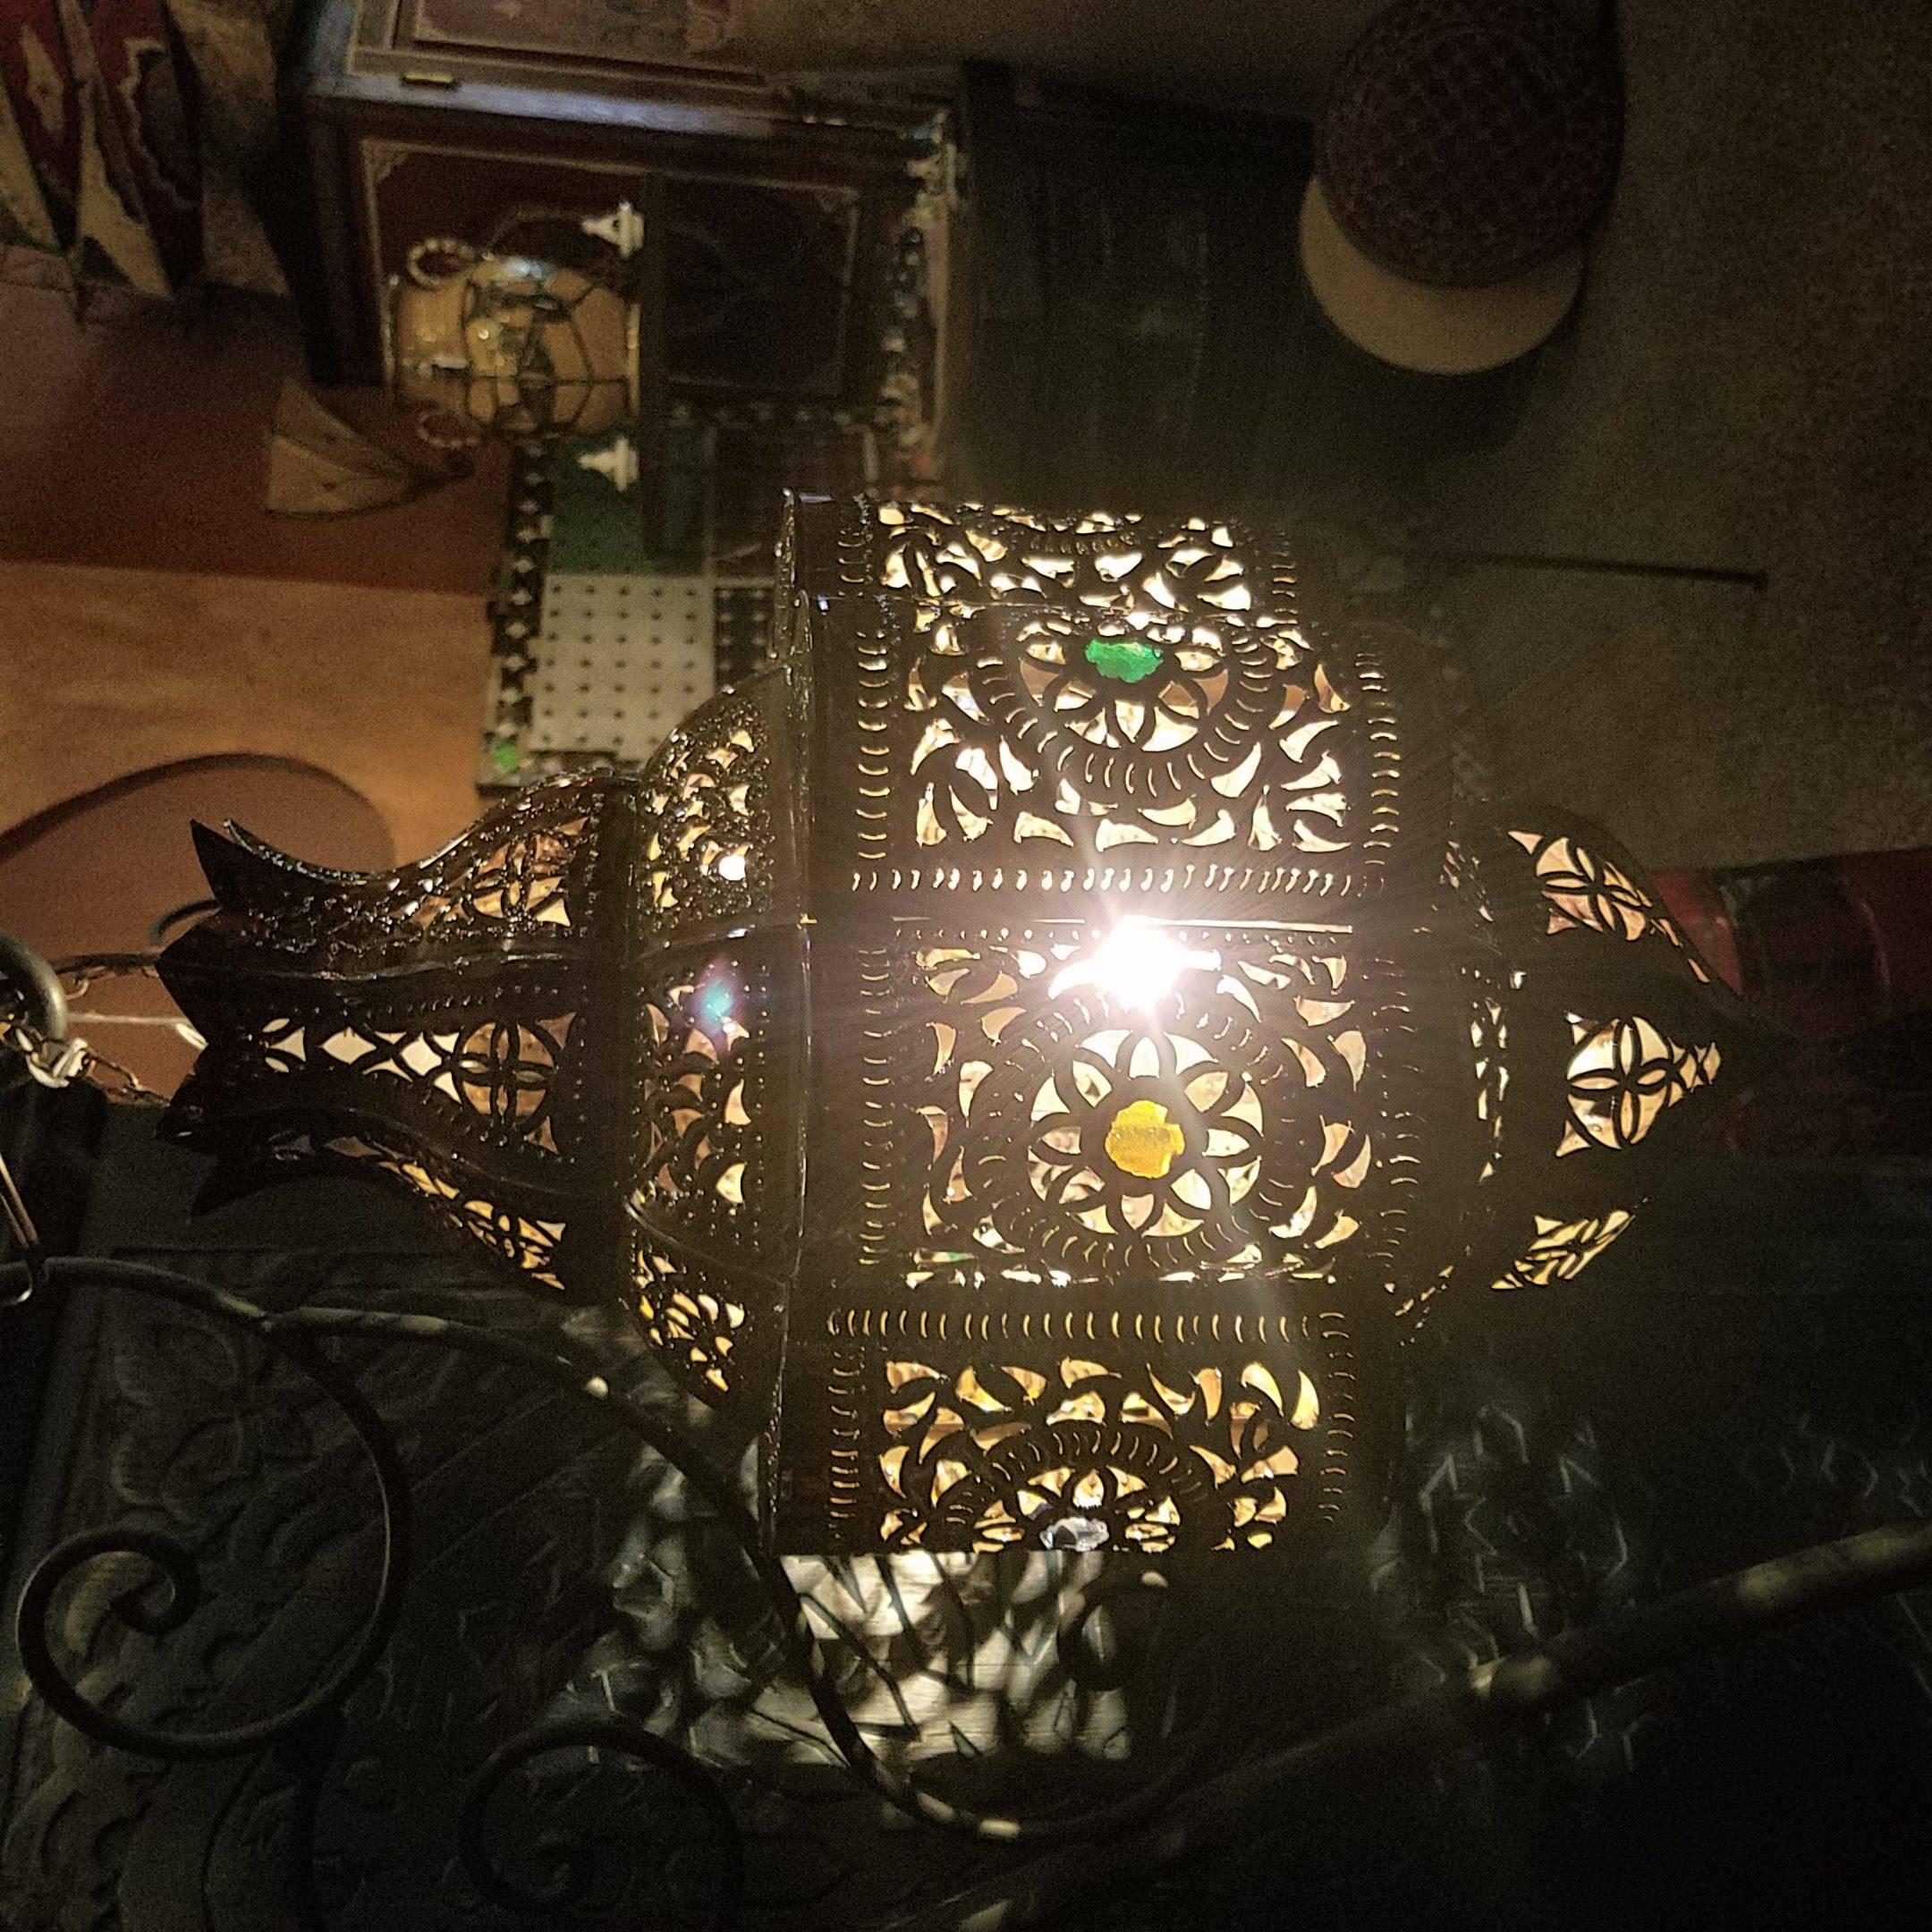 Medium size Moroccan pierced metal lantern, Bal style with small multi-color glass fragments on a copper stained frame, measuring approximately 22? in height and 11